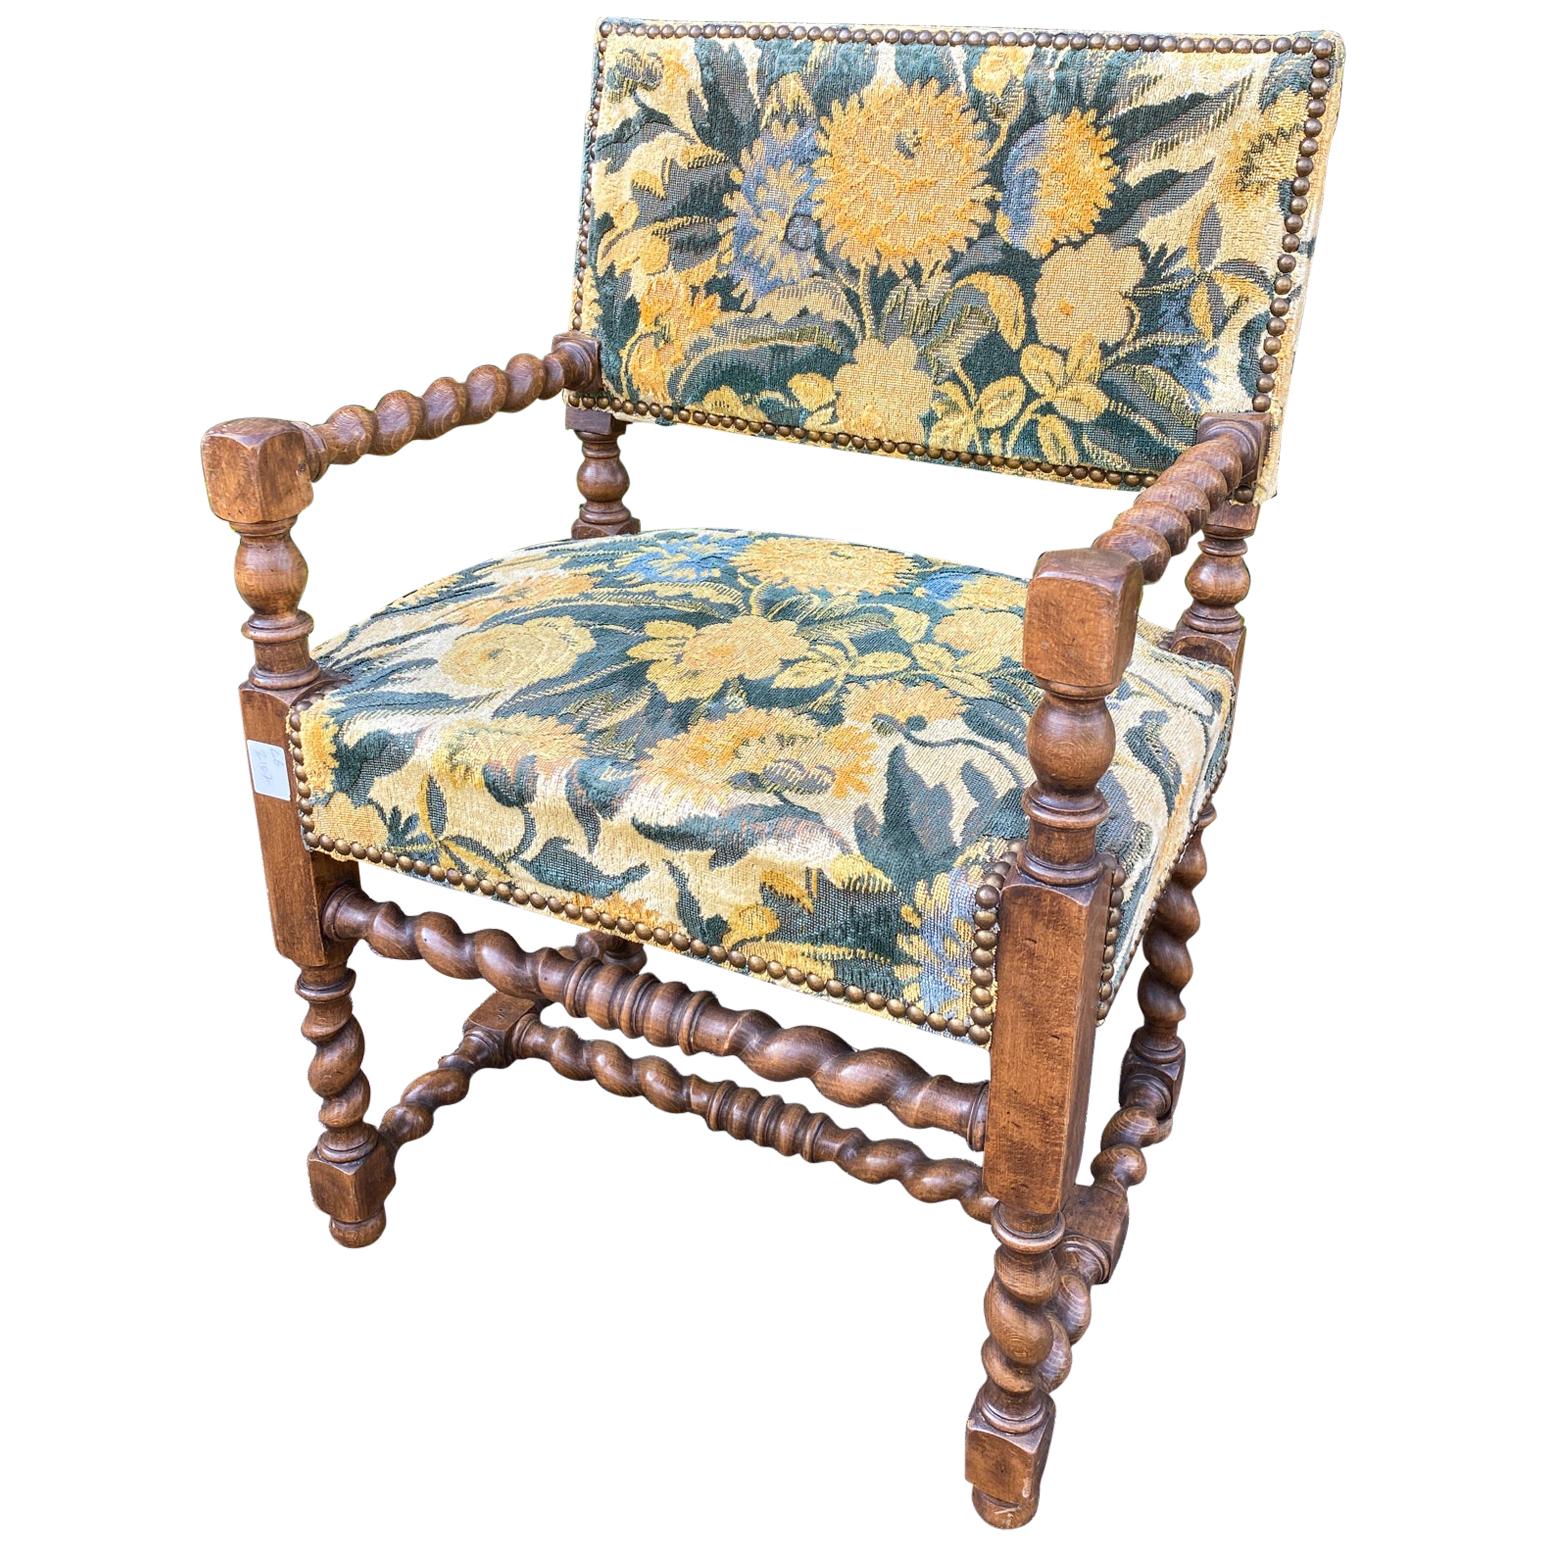 Antique French Barley Twist Armchair with Floral Upholstery, circa 1900